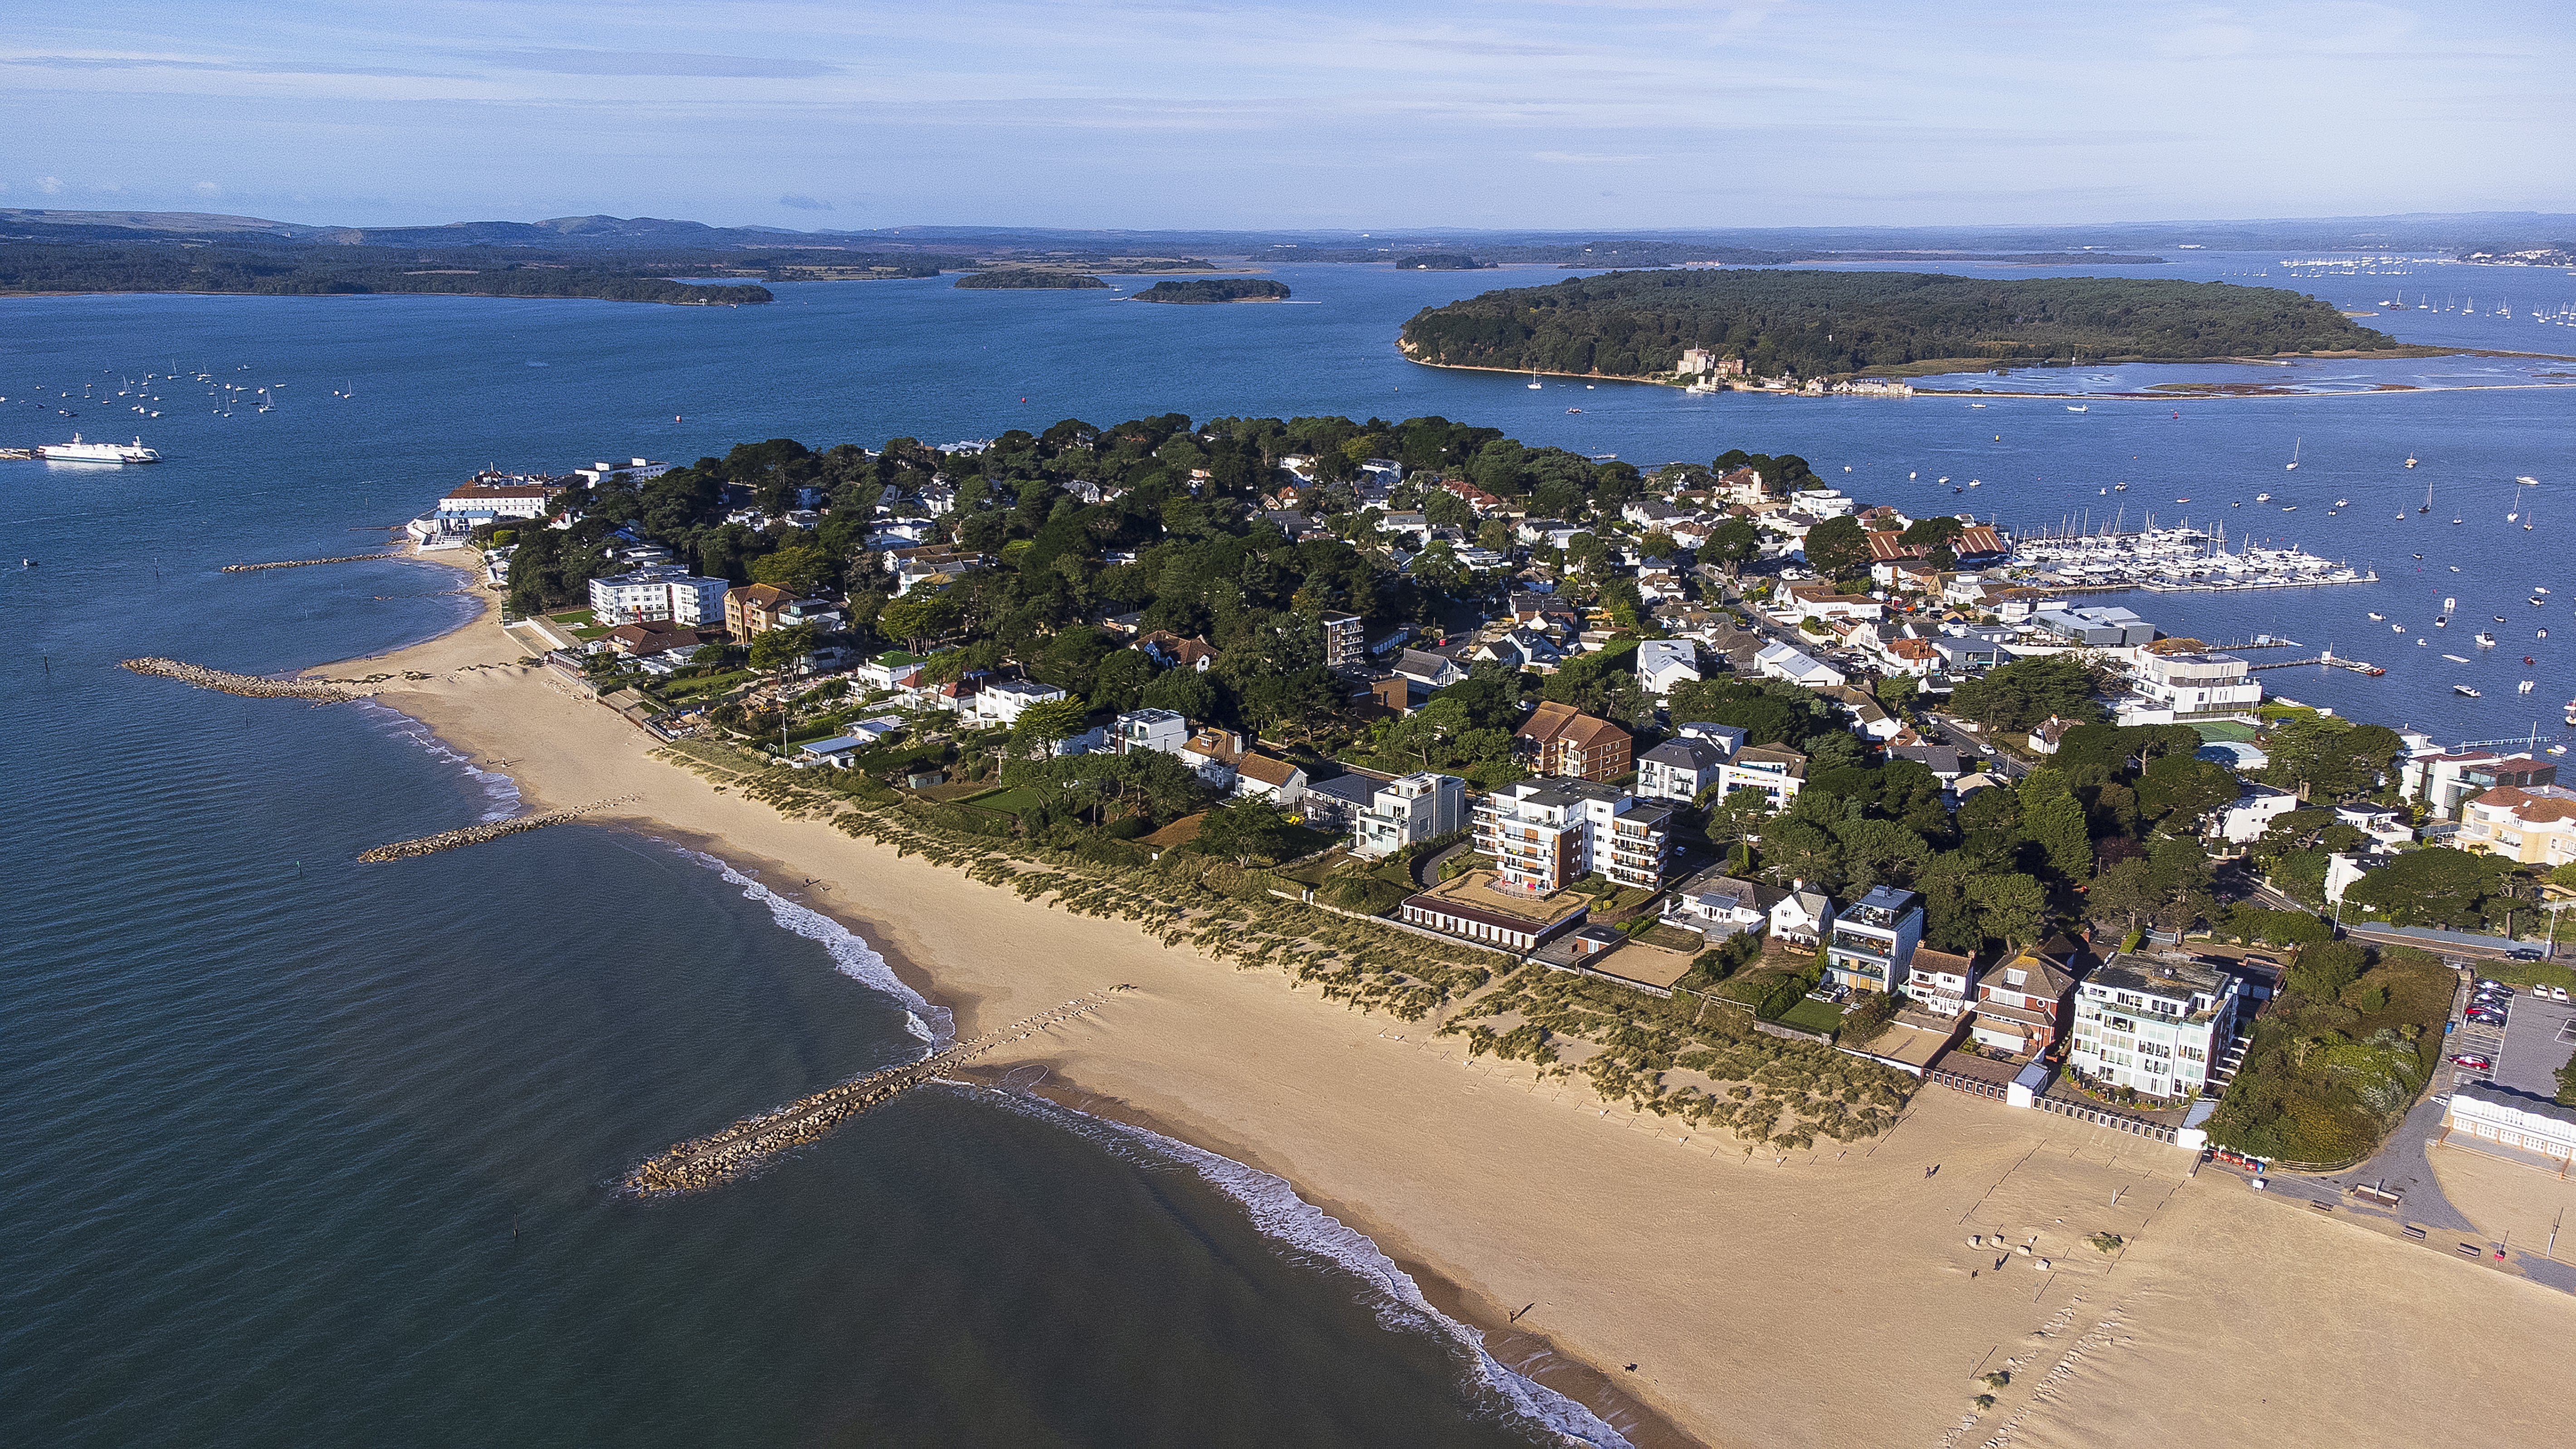 Sandbanks Beach was named the most sustainable in the world